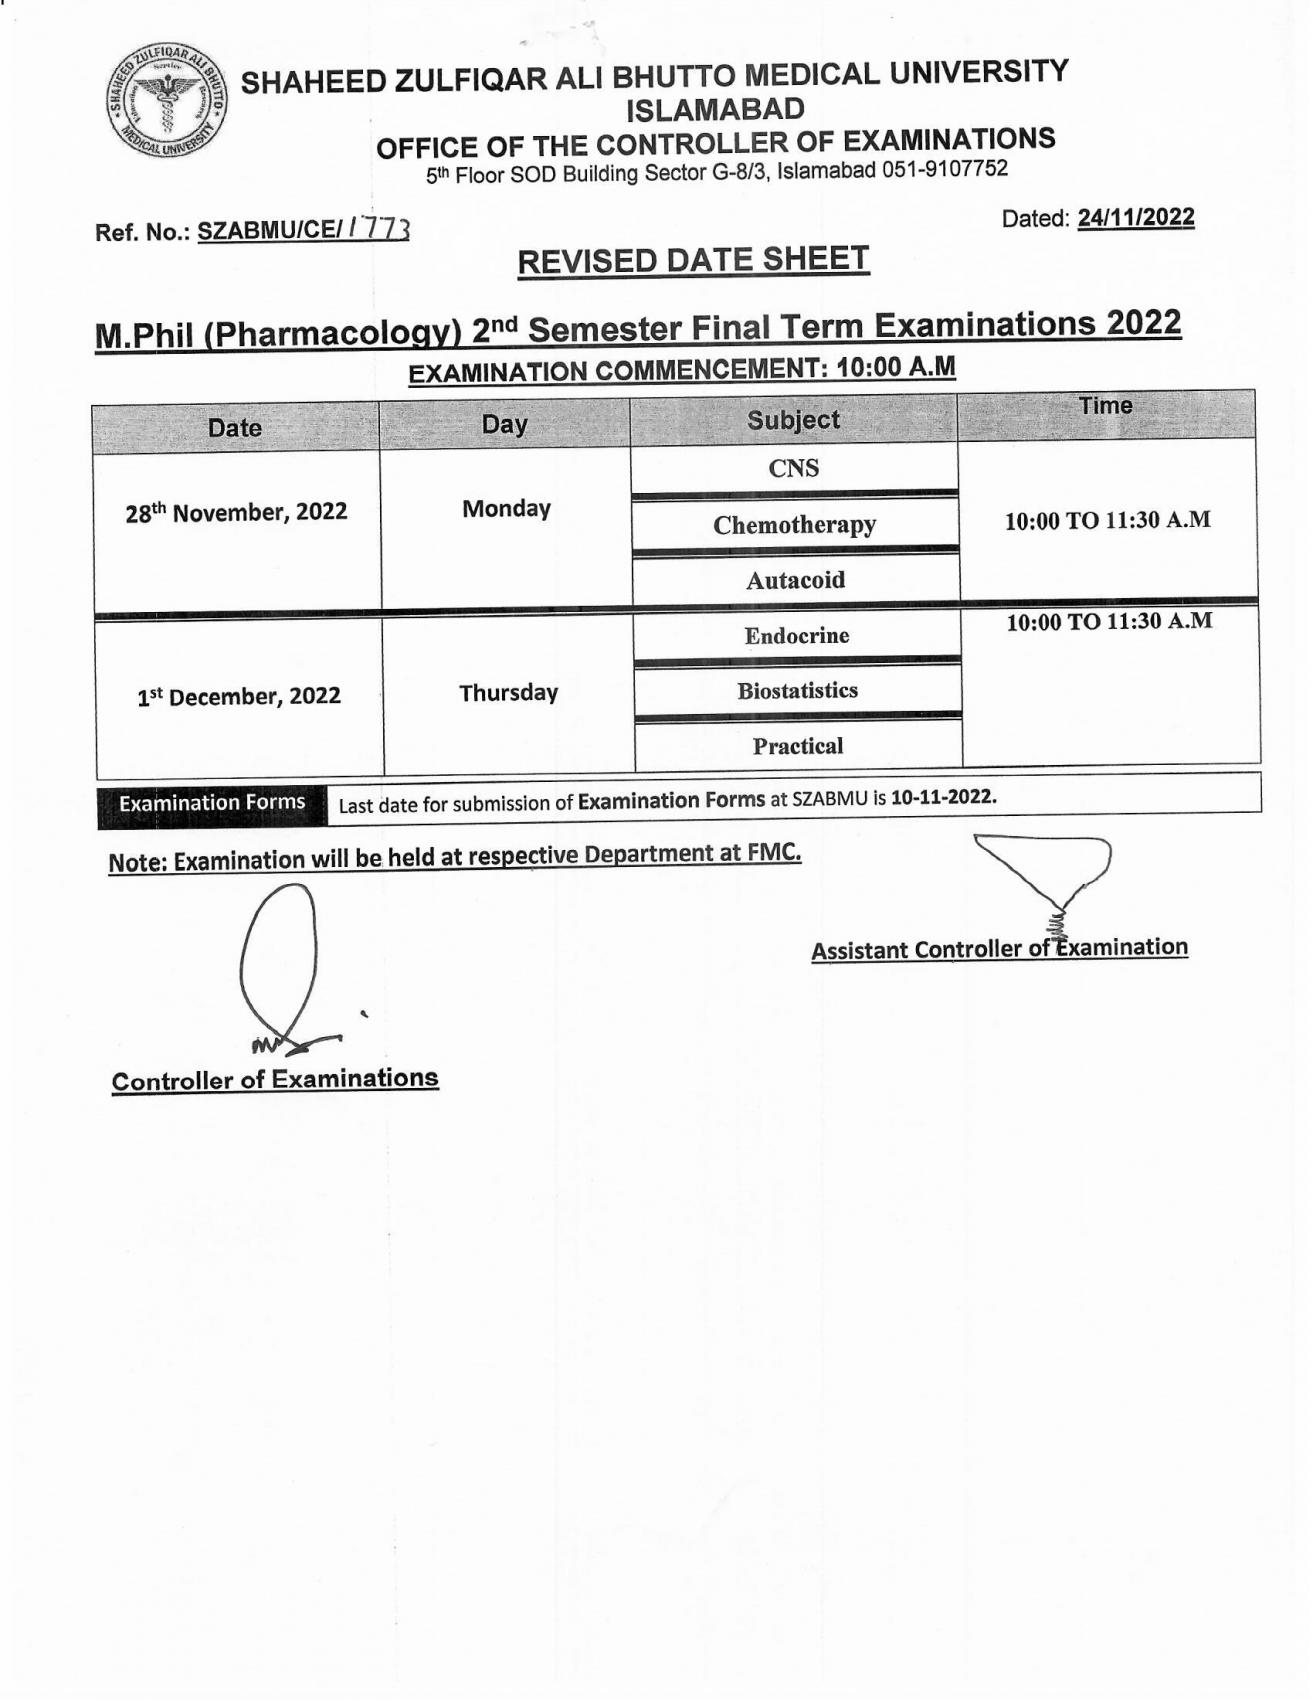 Revised Date Sheet - M.Phil (Pharmacology) 2nd Semester Final Term Examinations 2022